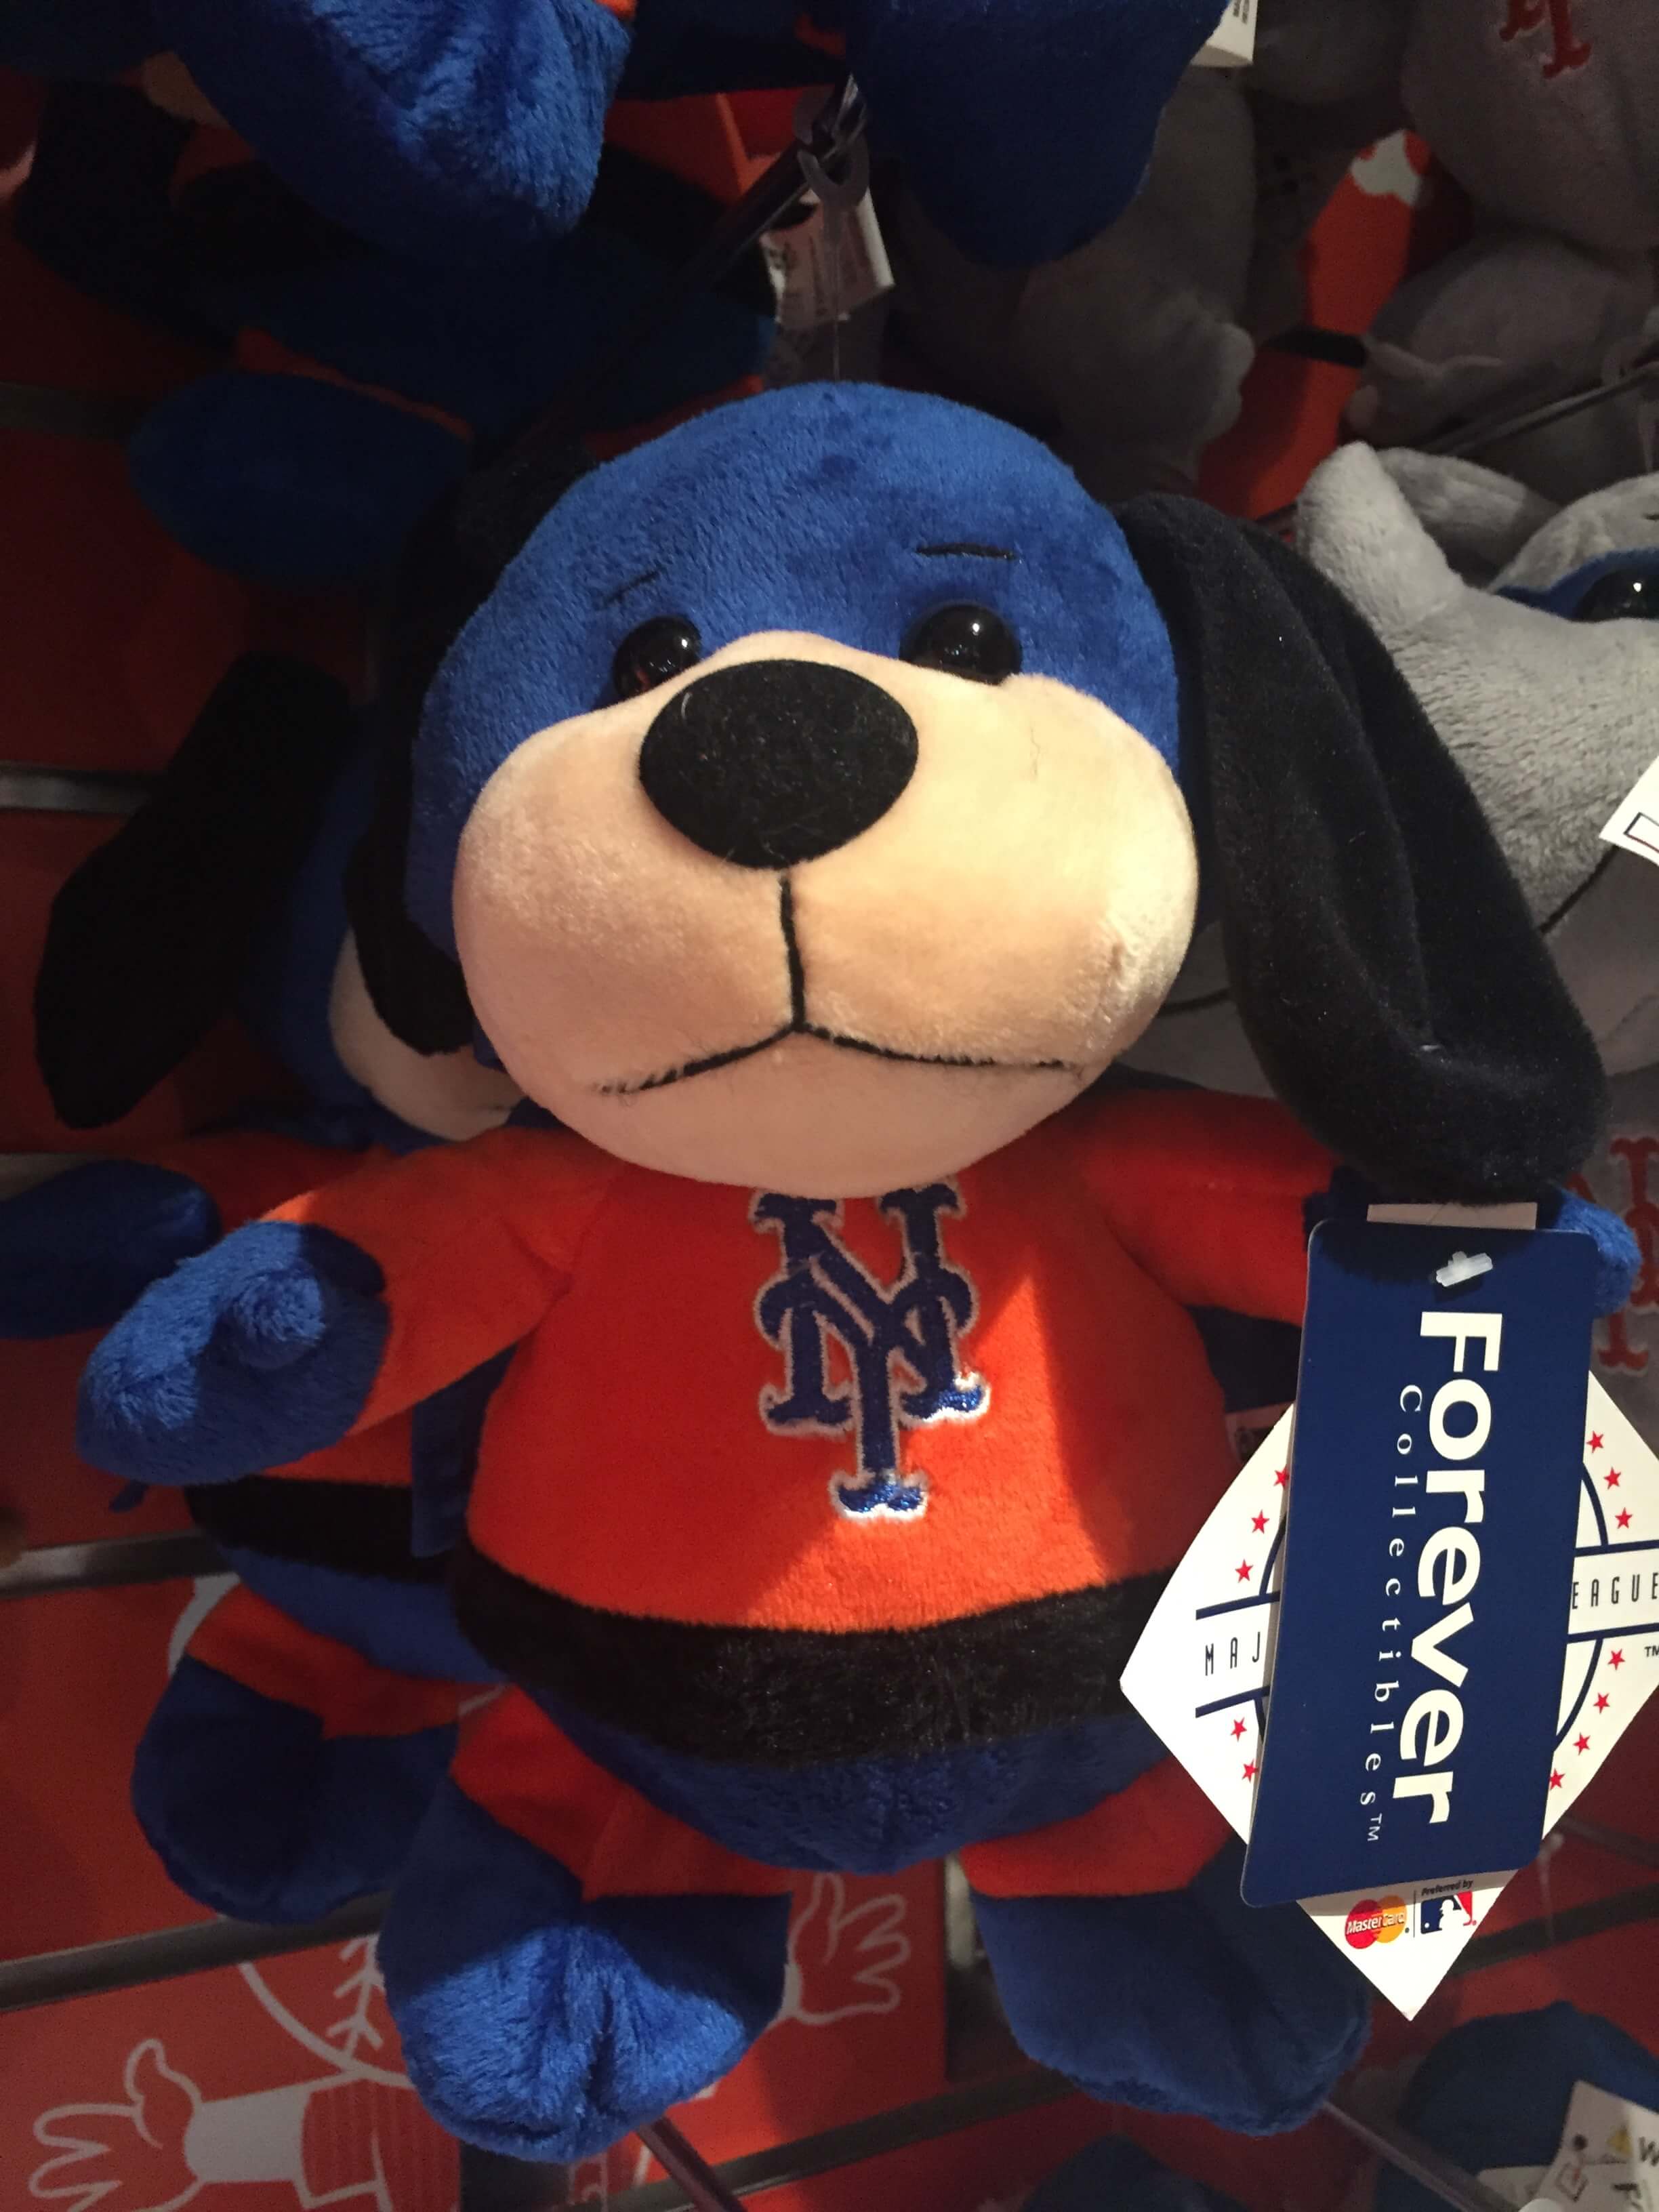 Mets dog shows incredible emotional depth The Mets Police